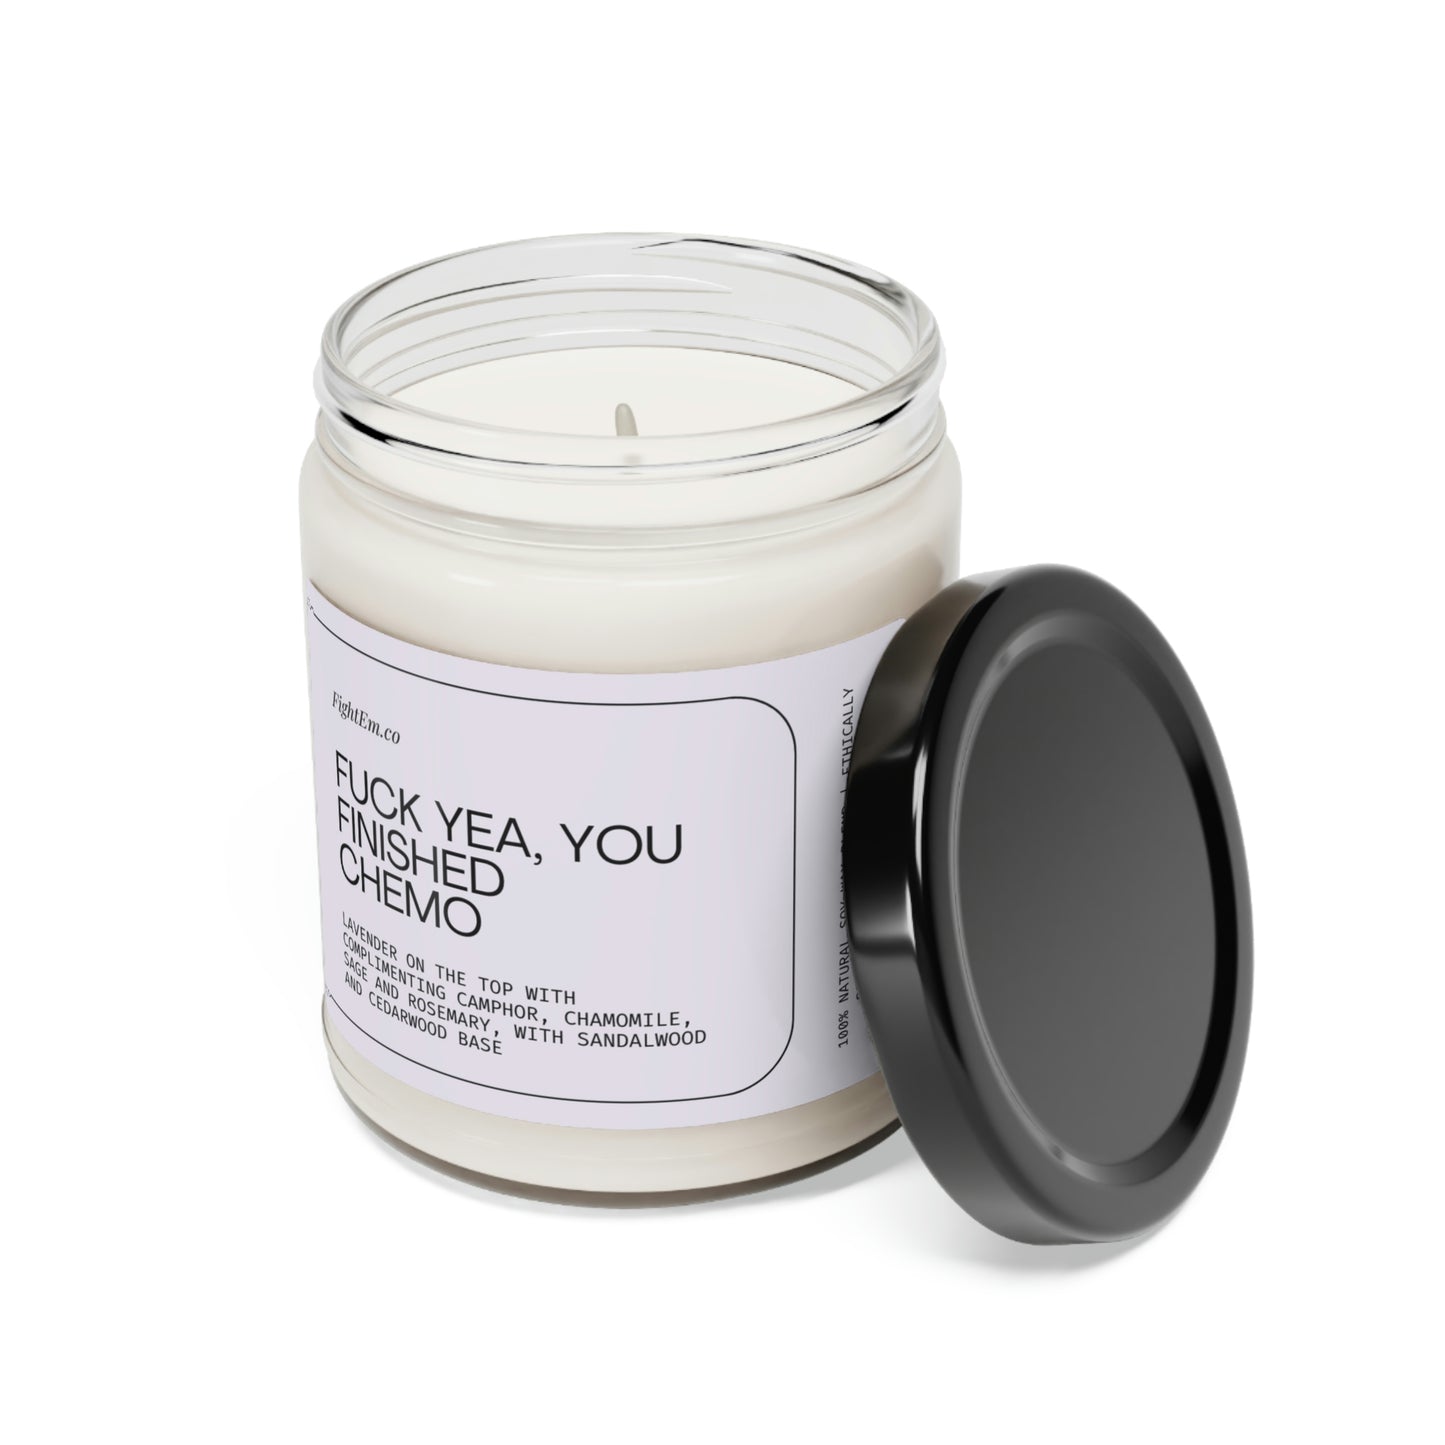 F*ck Yea, You Finished Chemo Scented Soy Candle 9oz 100% Natural Soy Wax